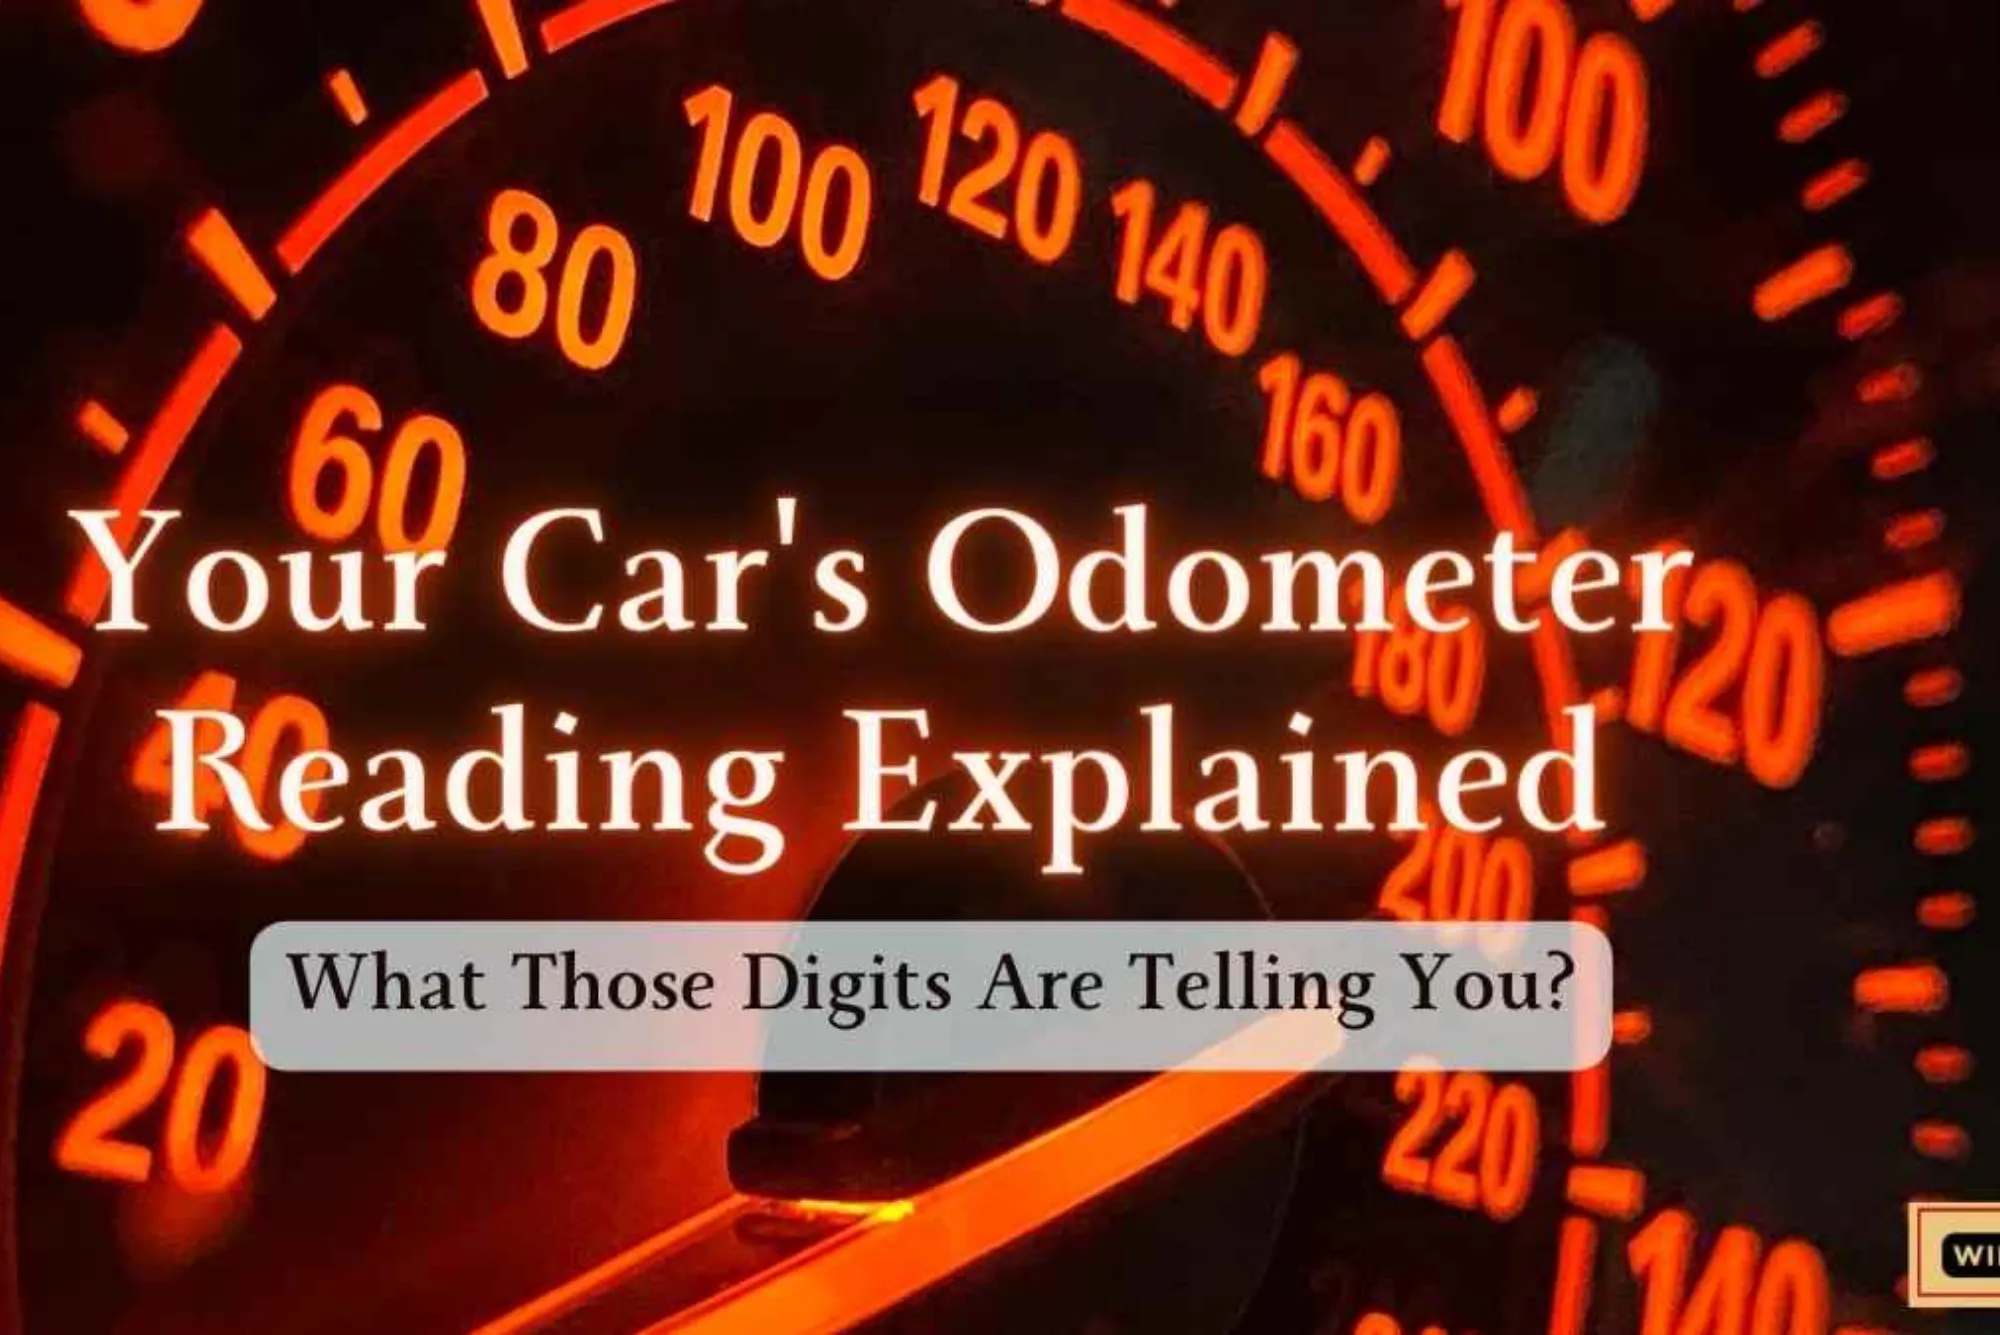 What is The Odometer Of An Automobile Measure